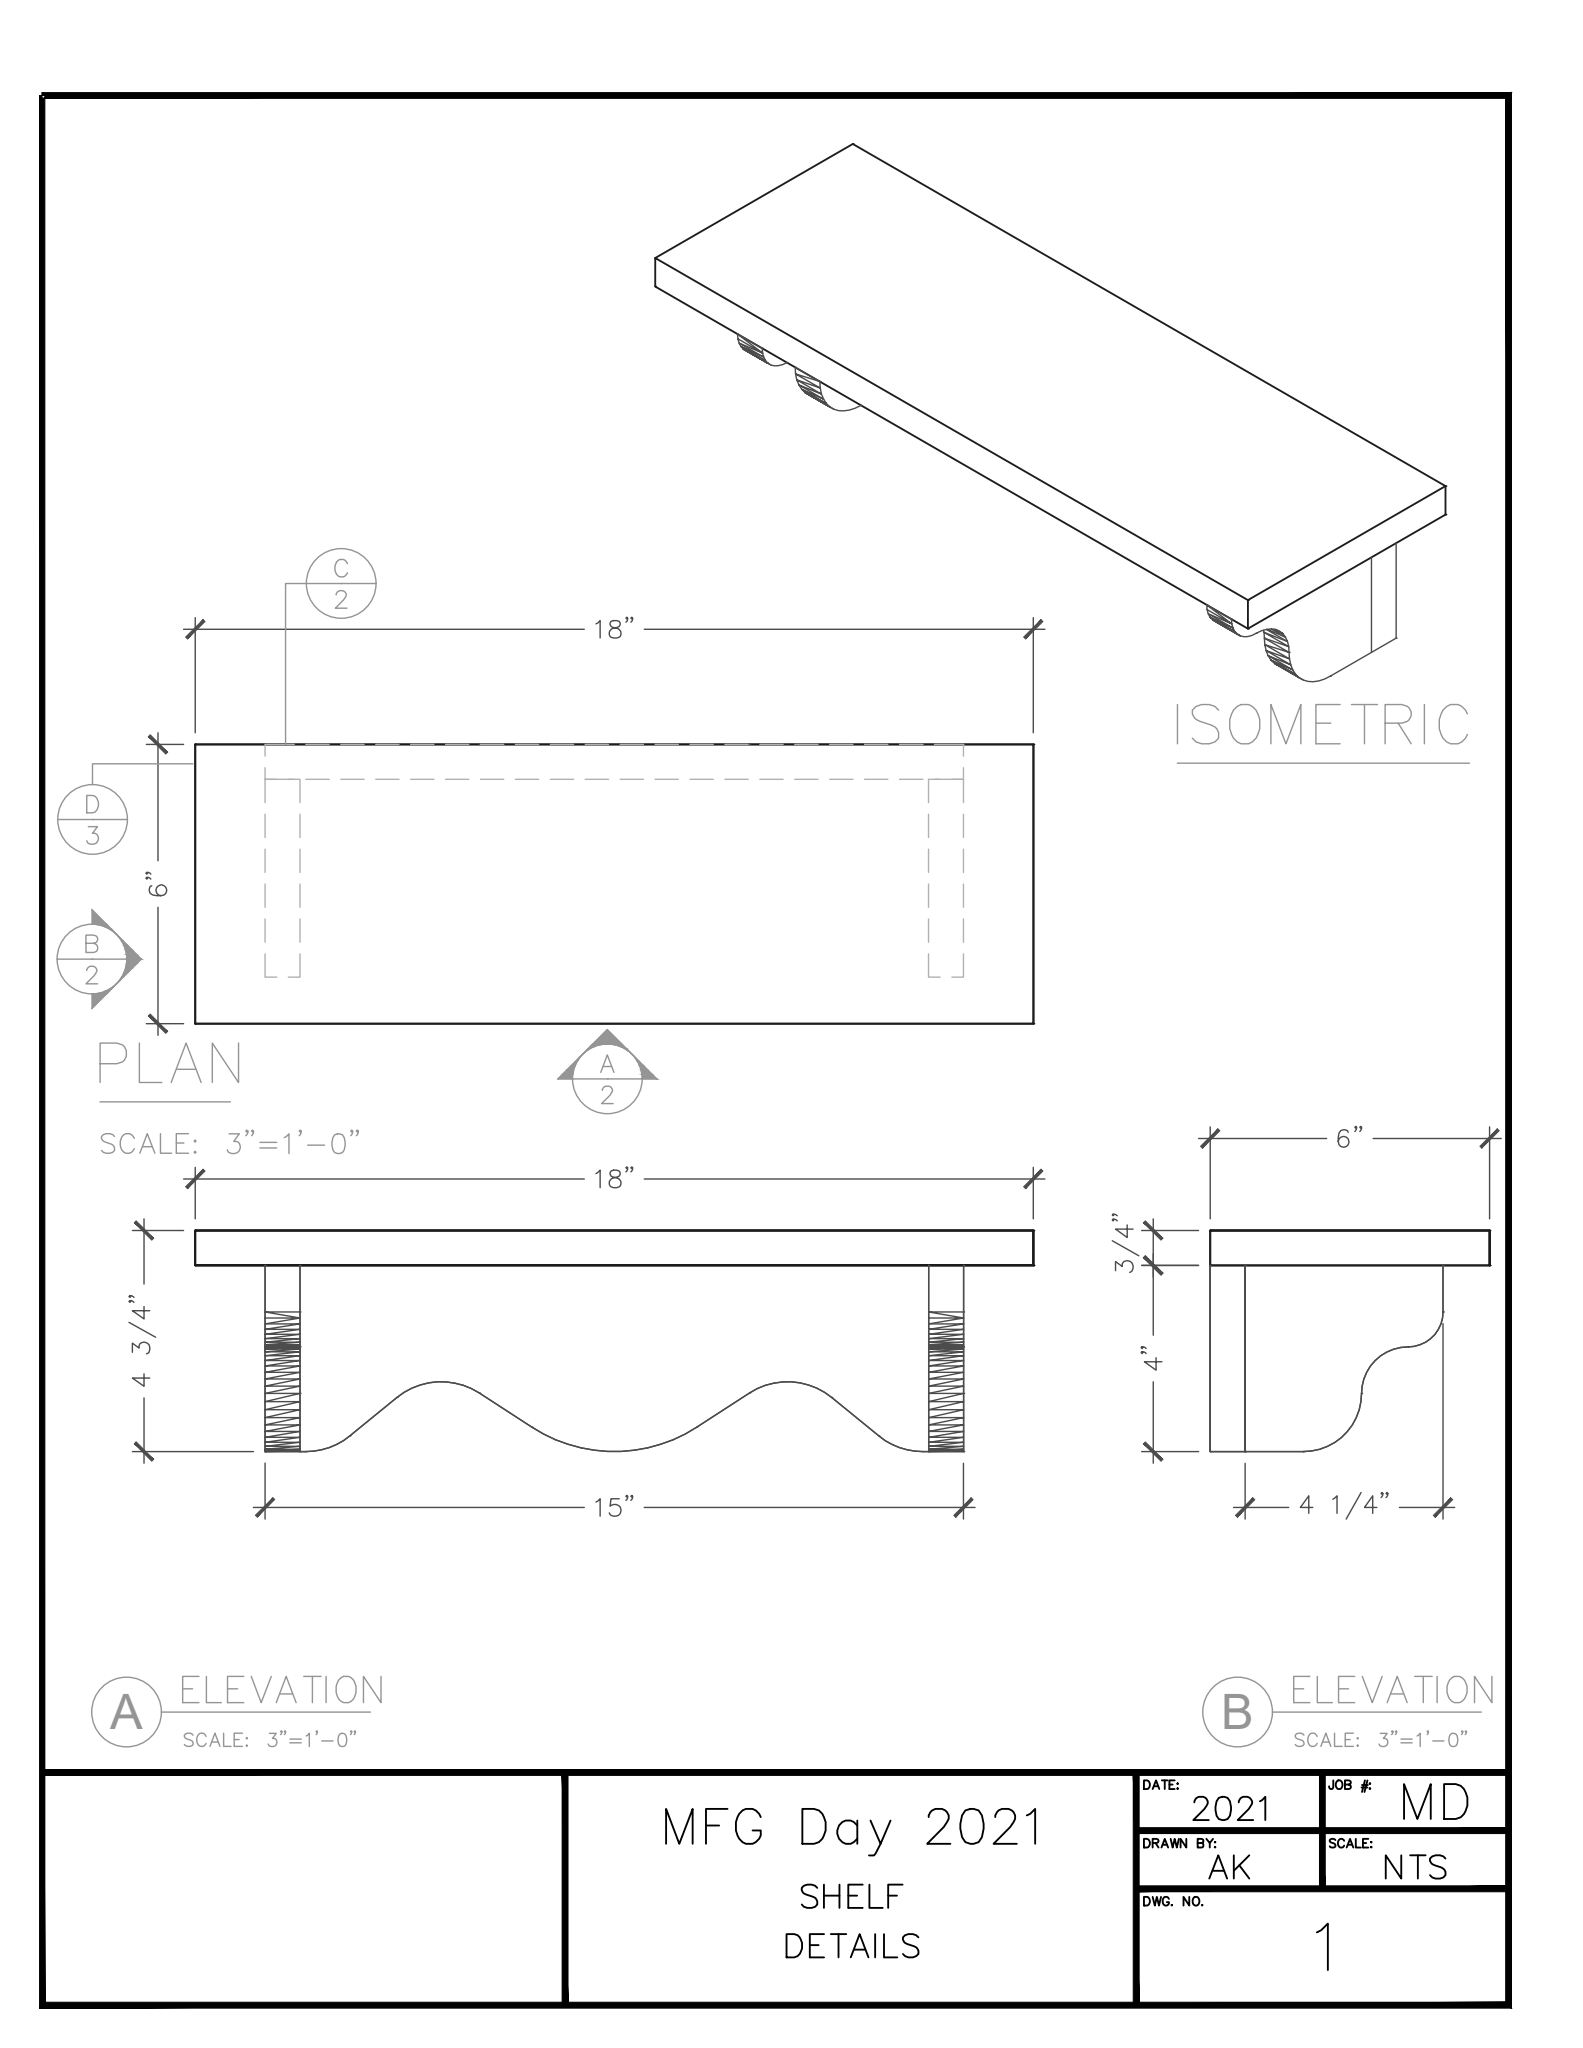 Students build shelf with these plans.